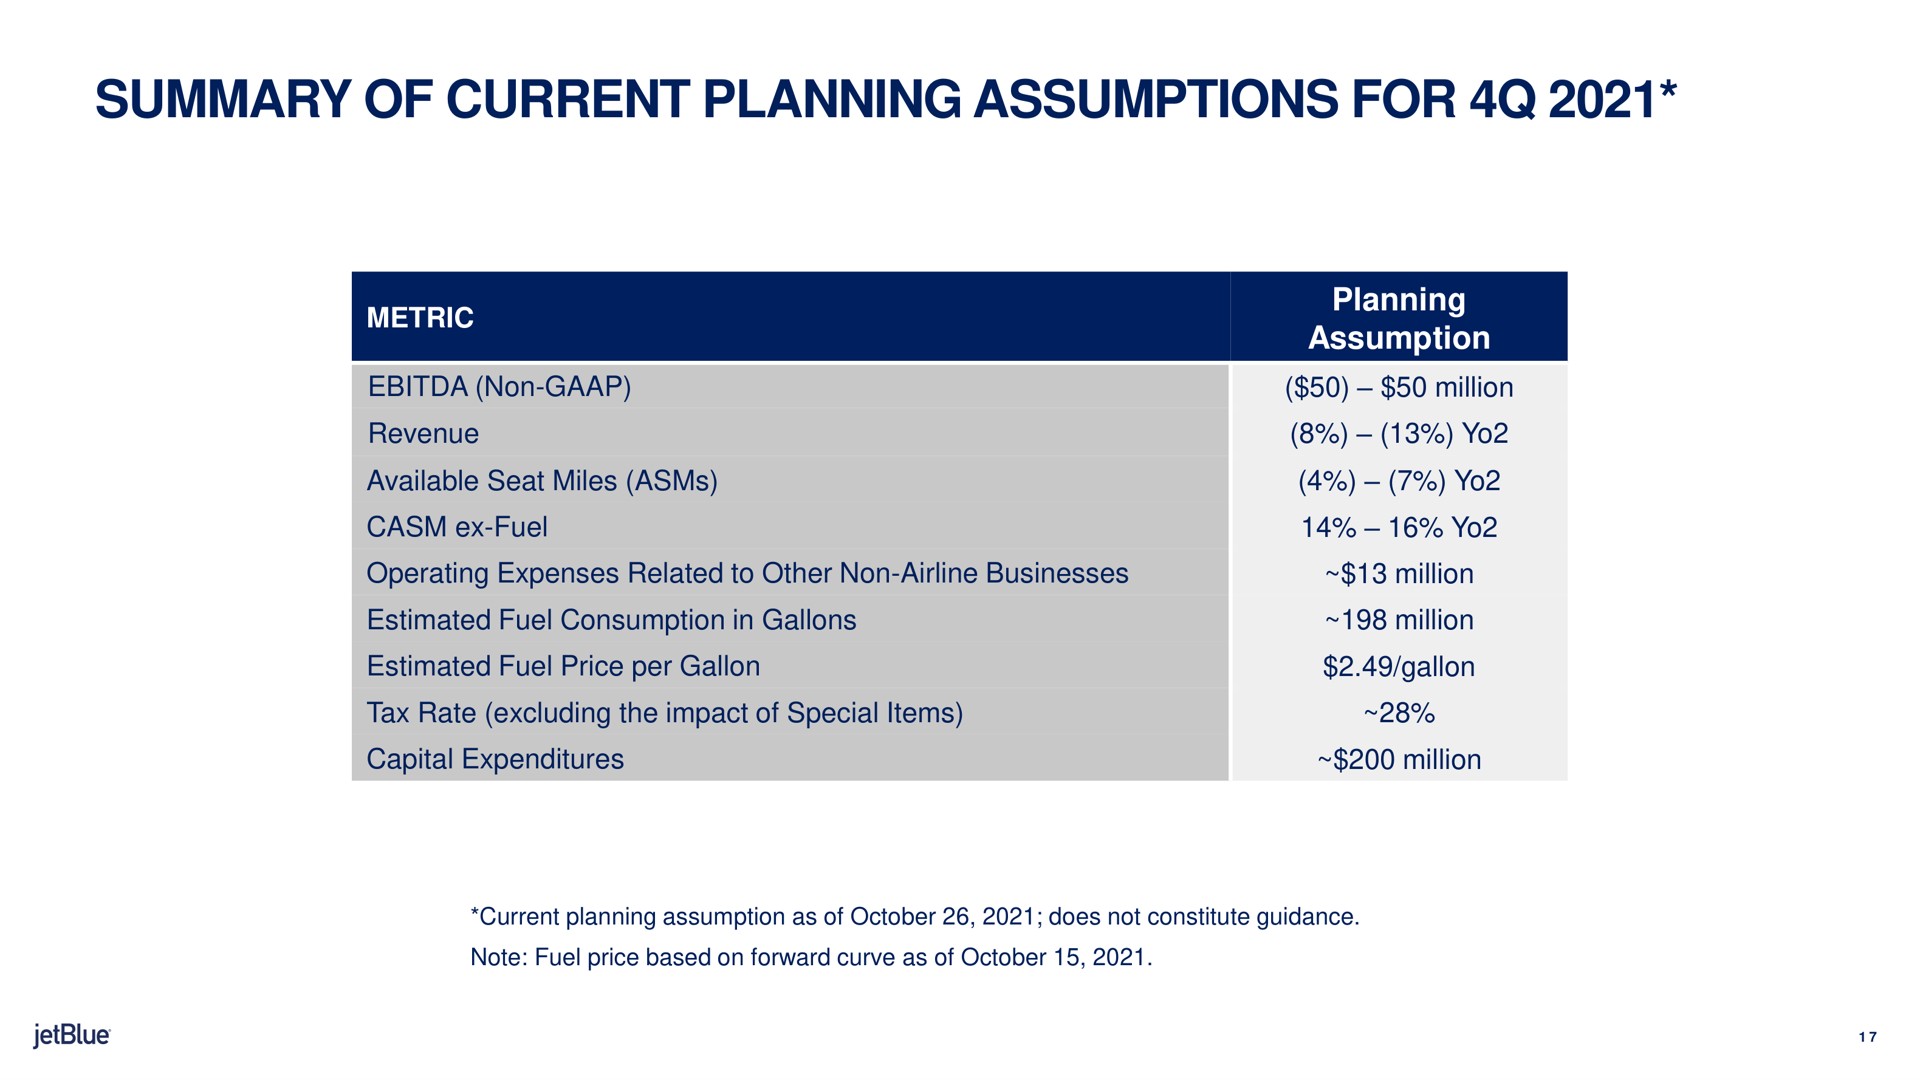 summary of current planning assumptions for planning assumption metric | jetBlue